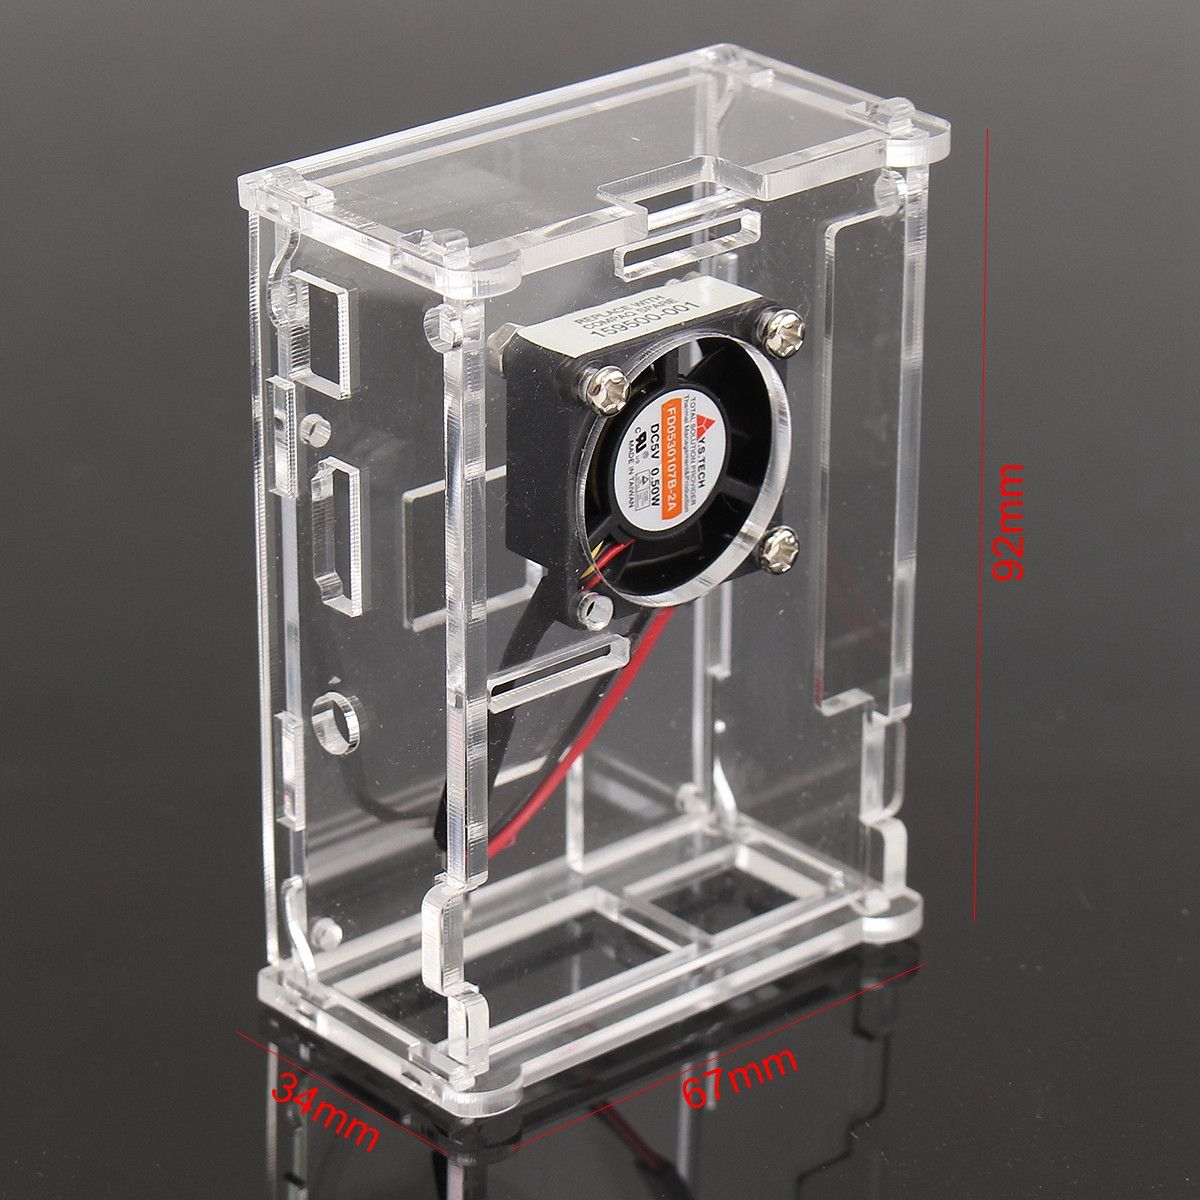 Transparent-Acrylic-Case-Shell-Enclosure-Box-with-Fan-For-Raspberry-Pi-3B2BB-1145104